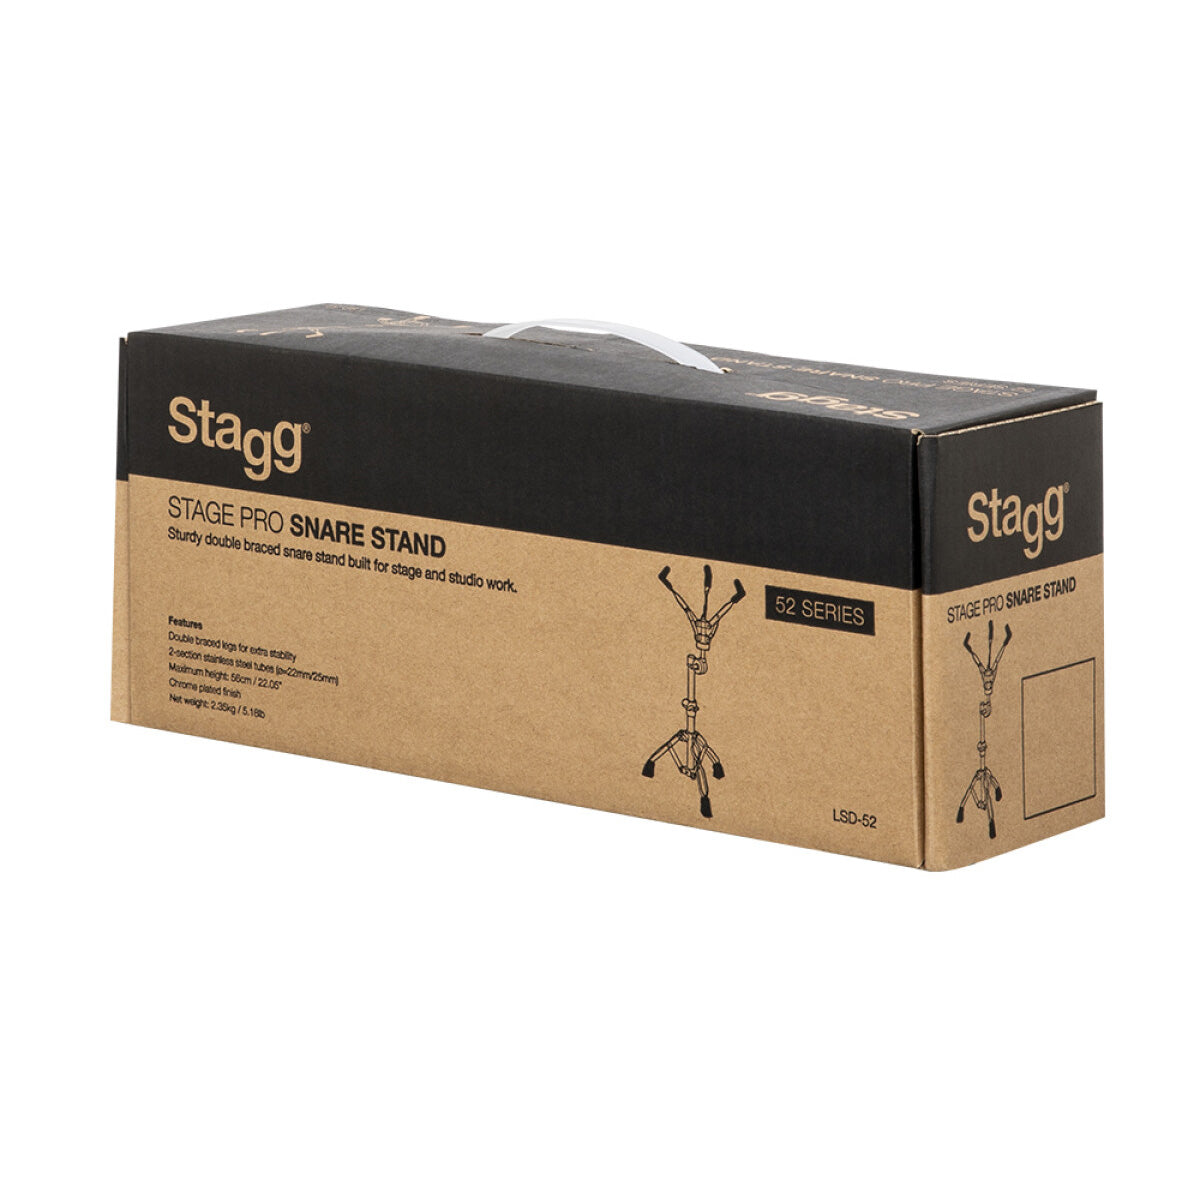 Stagg 52 Series Snare Stand